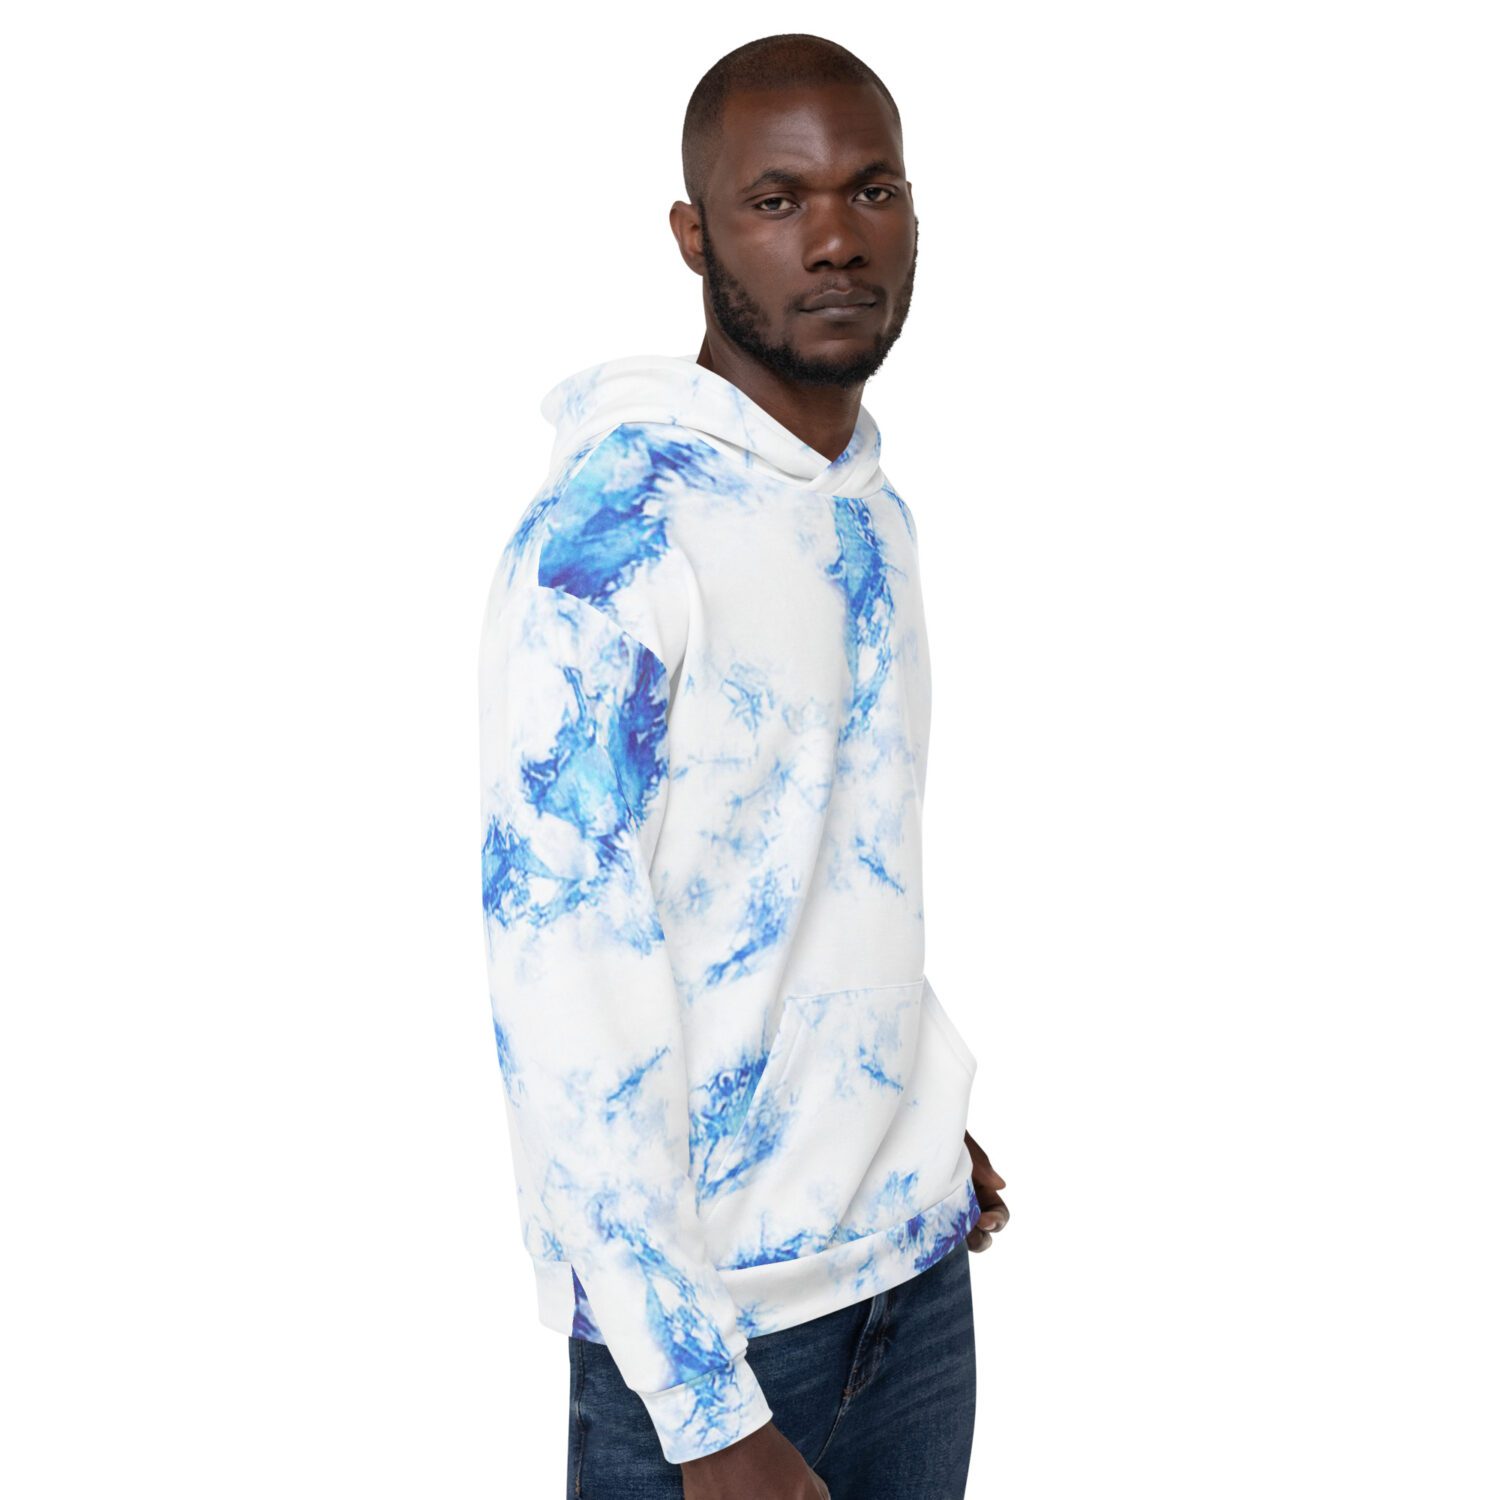 Cobalt blue and white comfy unisex hoodie with a soft outside and a vibrant print, and an even softer brushed fleece inside making it nice and warm. Sublimation print all over.